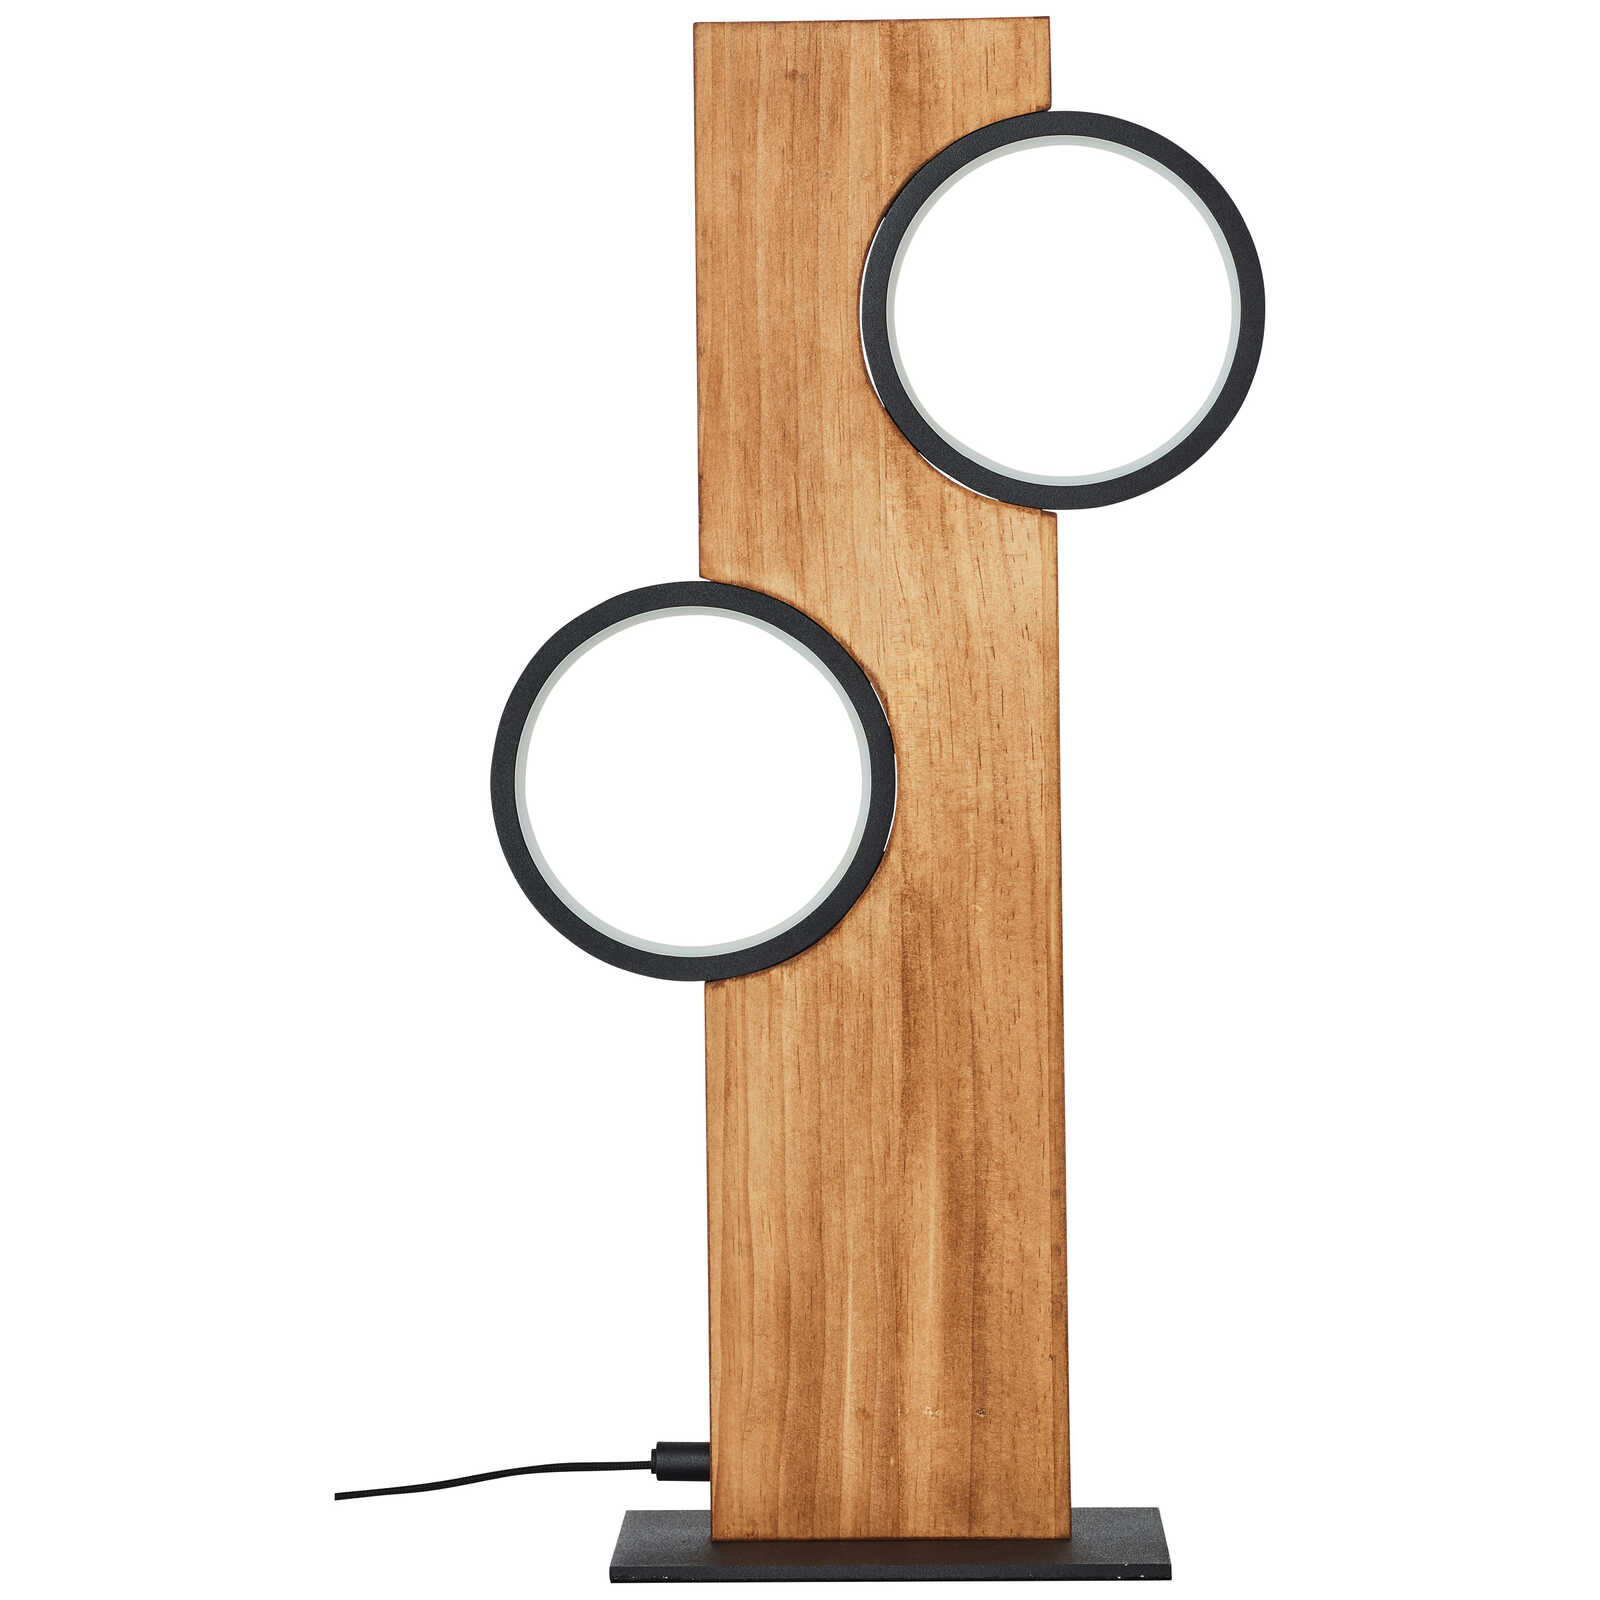             Wooden table lamp - Elena 2 - Brown
        